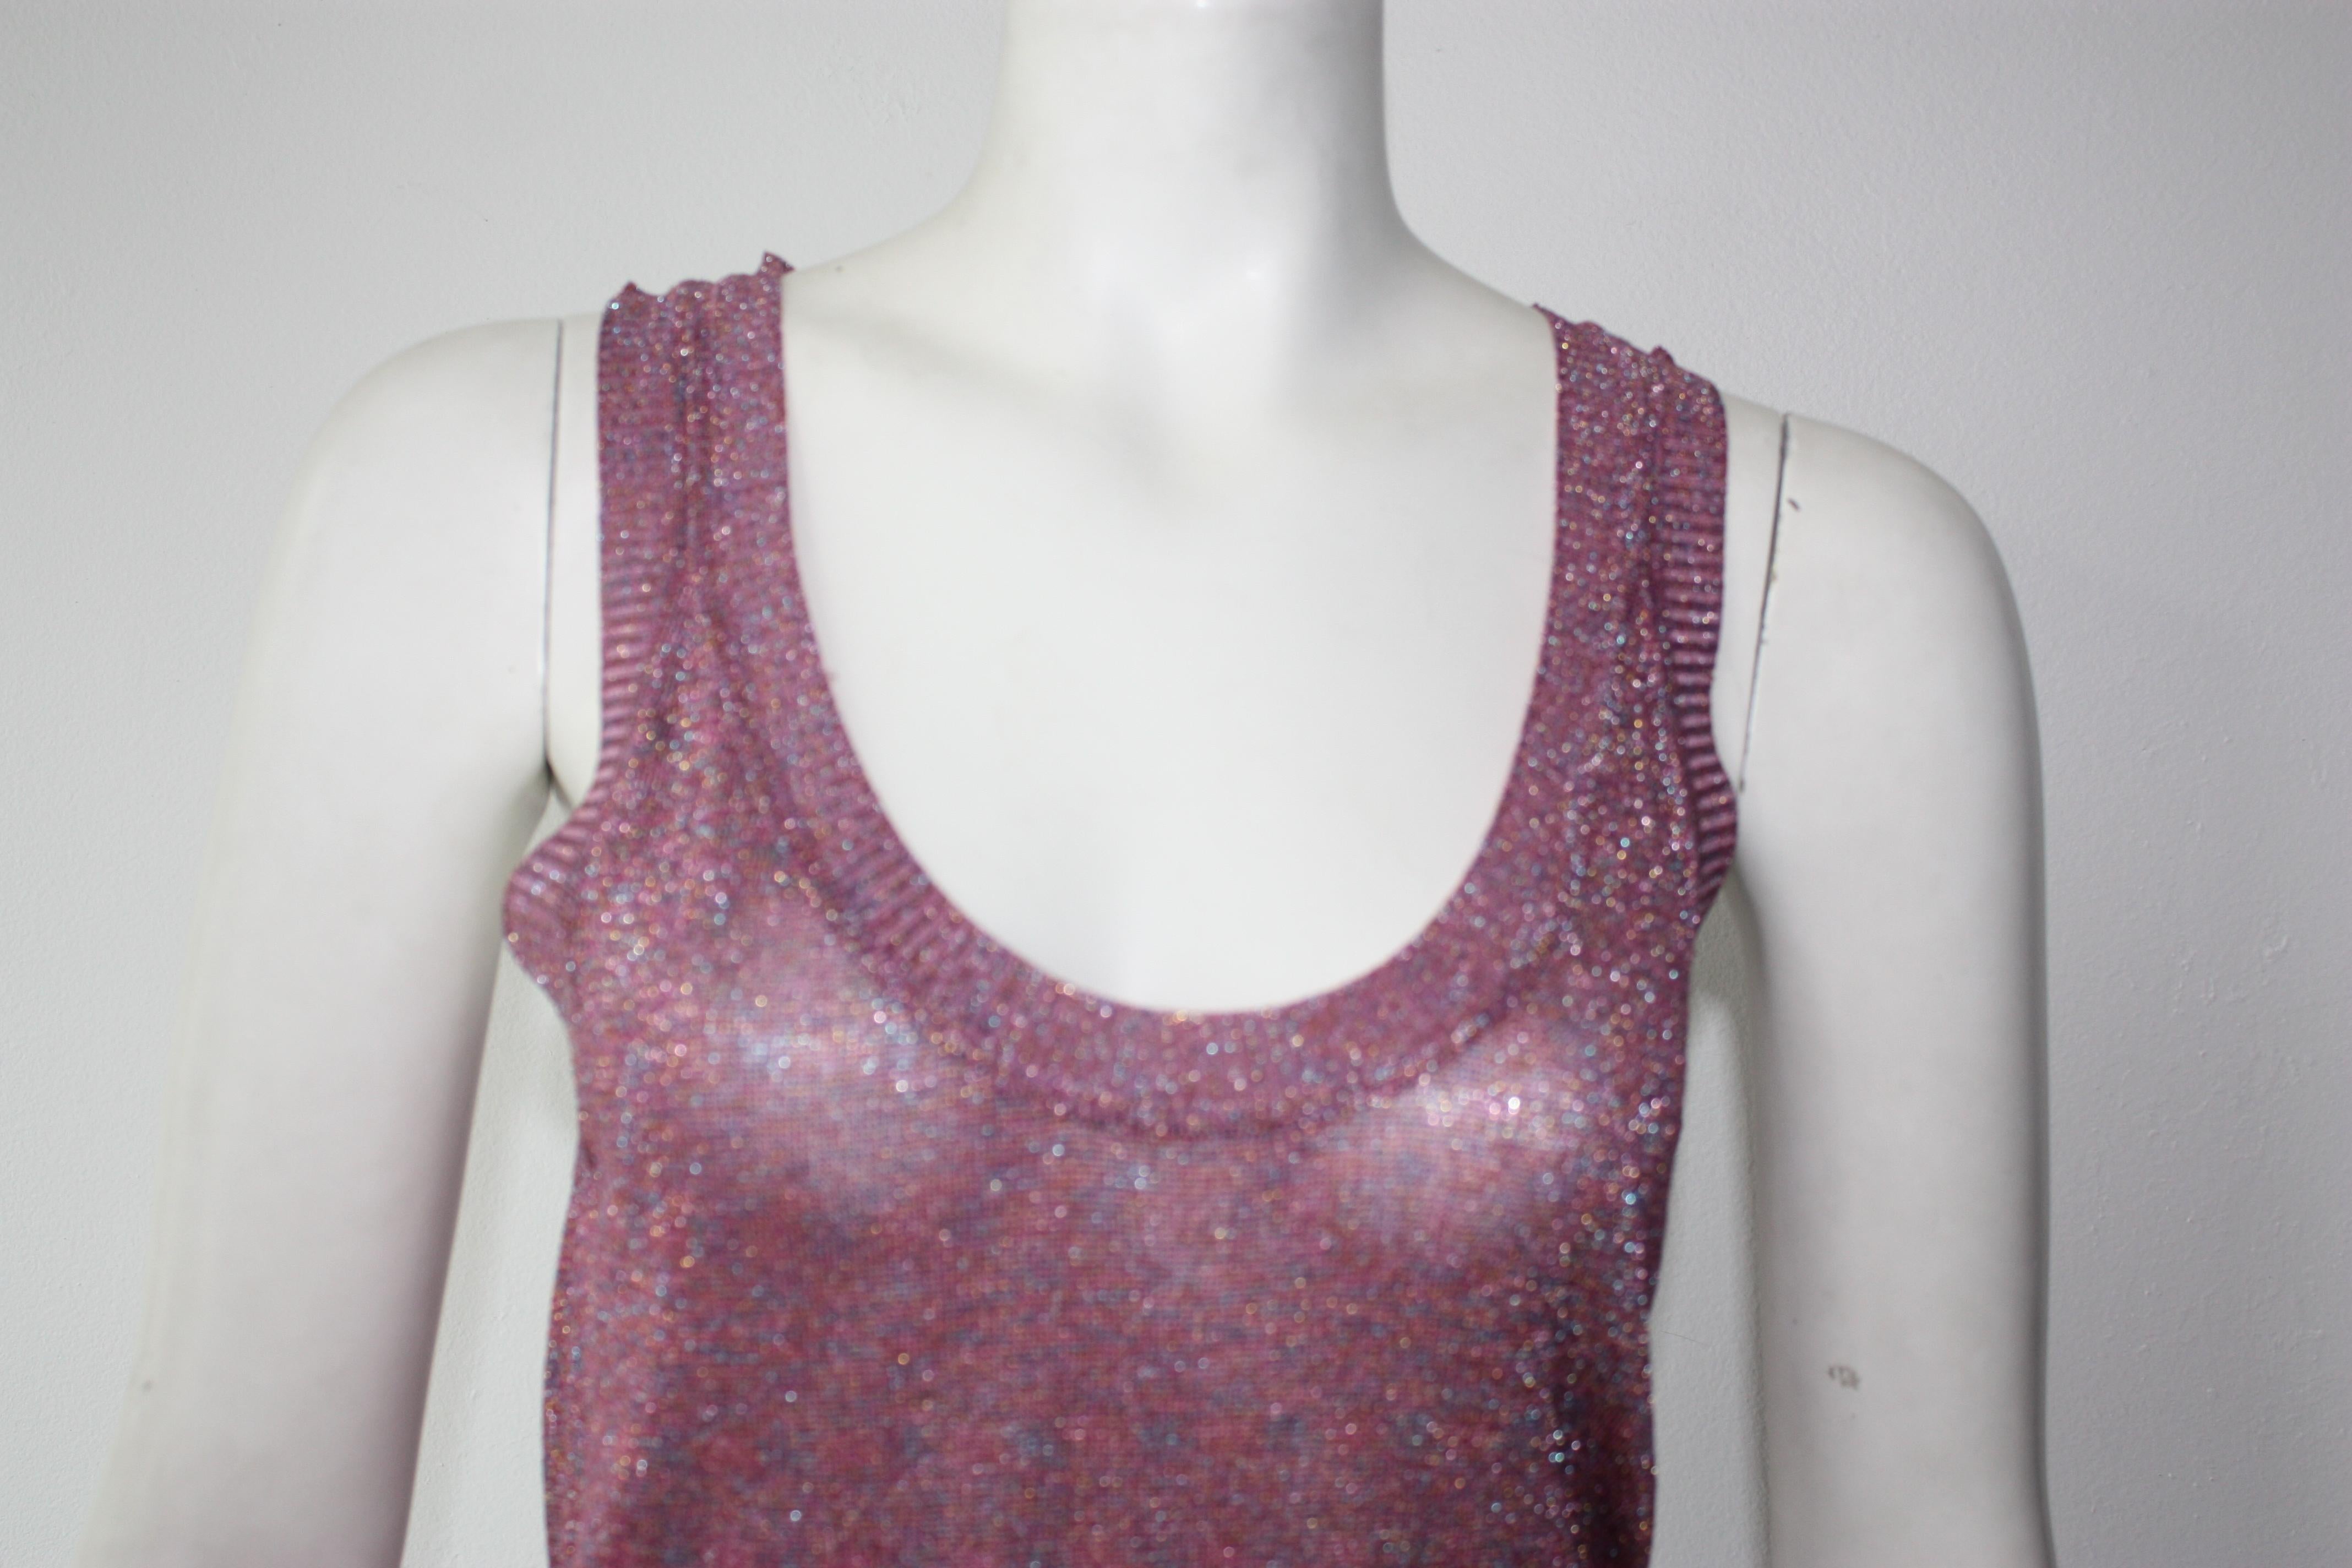 Missoni sleeveless pink sparkle knit top. Brand label tag has detached on one side, otherwise, in perfect condition.

Rayon, cupro, polyester blend.
Size 40 (fits smaller ) 